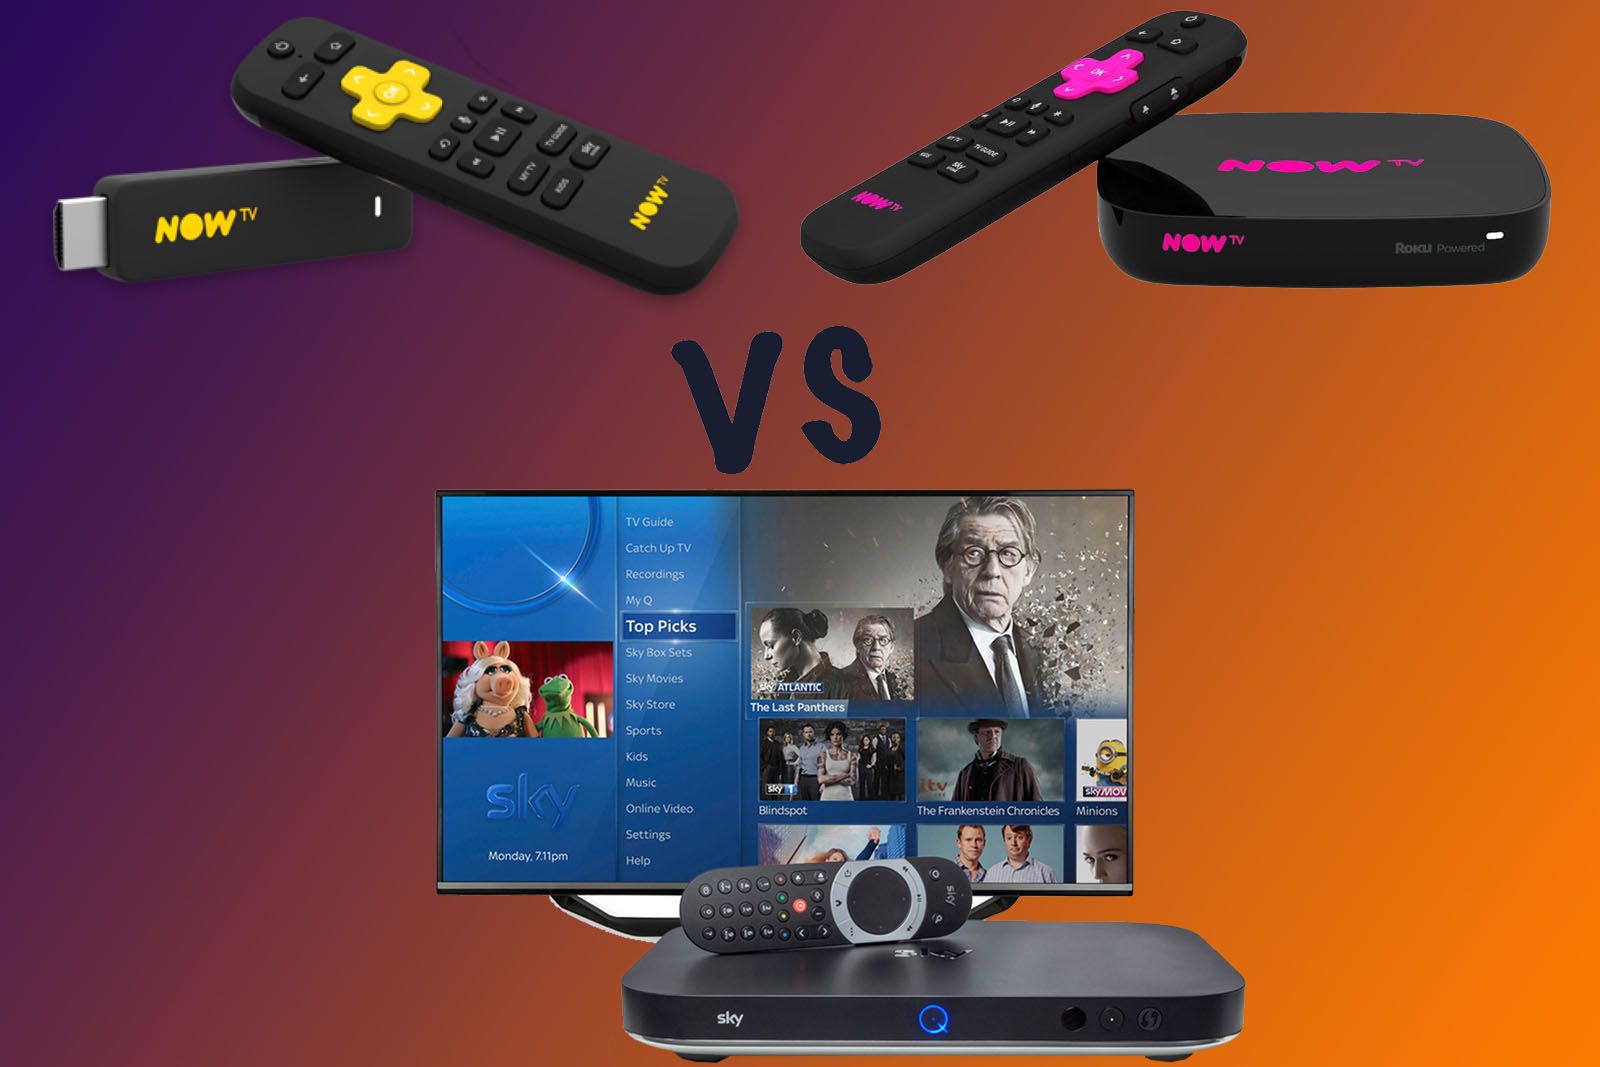 Now Tv Vs Sky Q Which Sky Package Is Right For You image 1